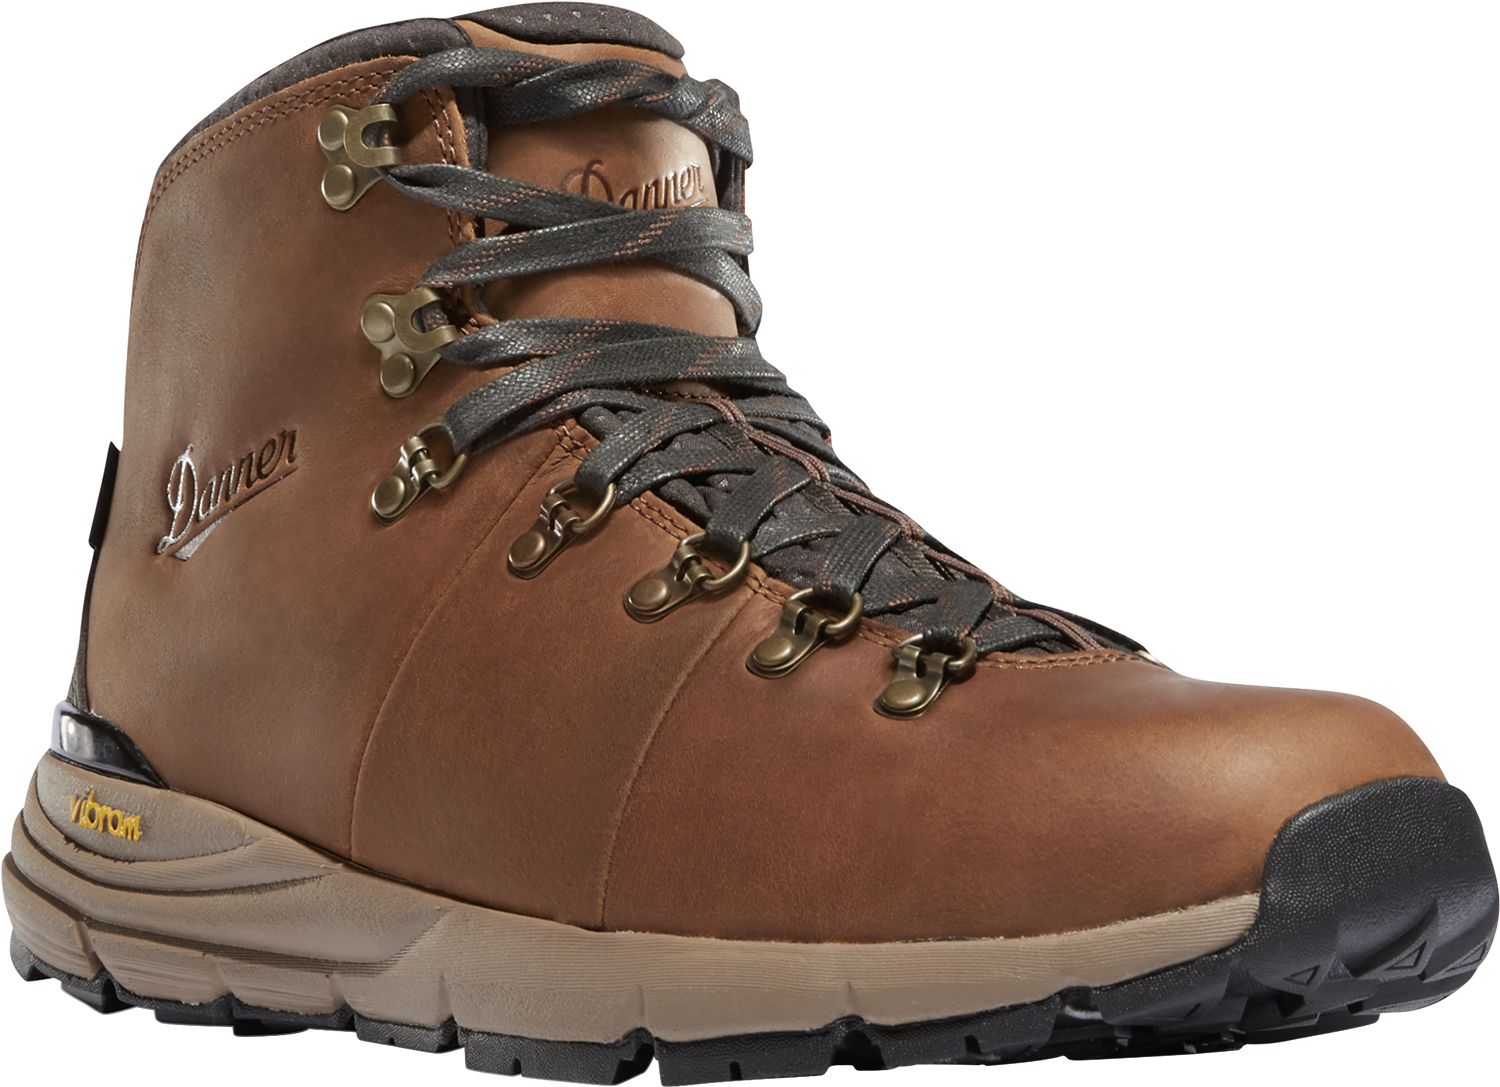 Photos - Trekking Shoes Danner Men's Mountain 600 4.5'' Leather Waterproof Hiking Boots, Size 8.5, 